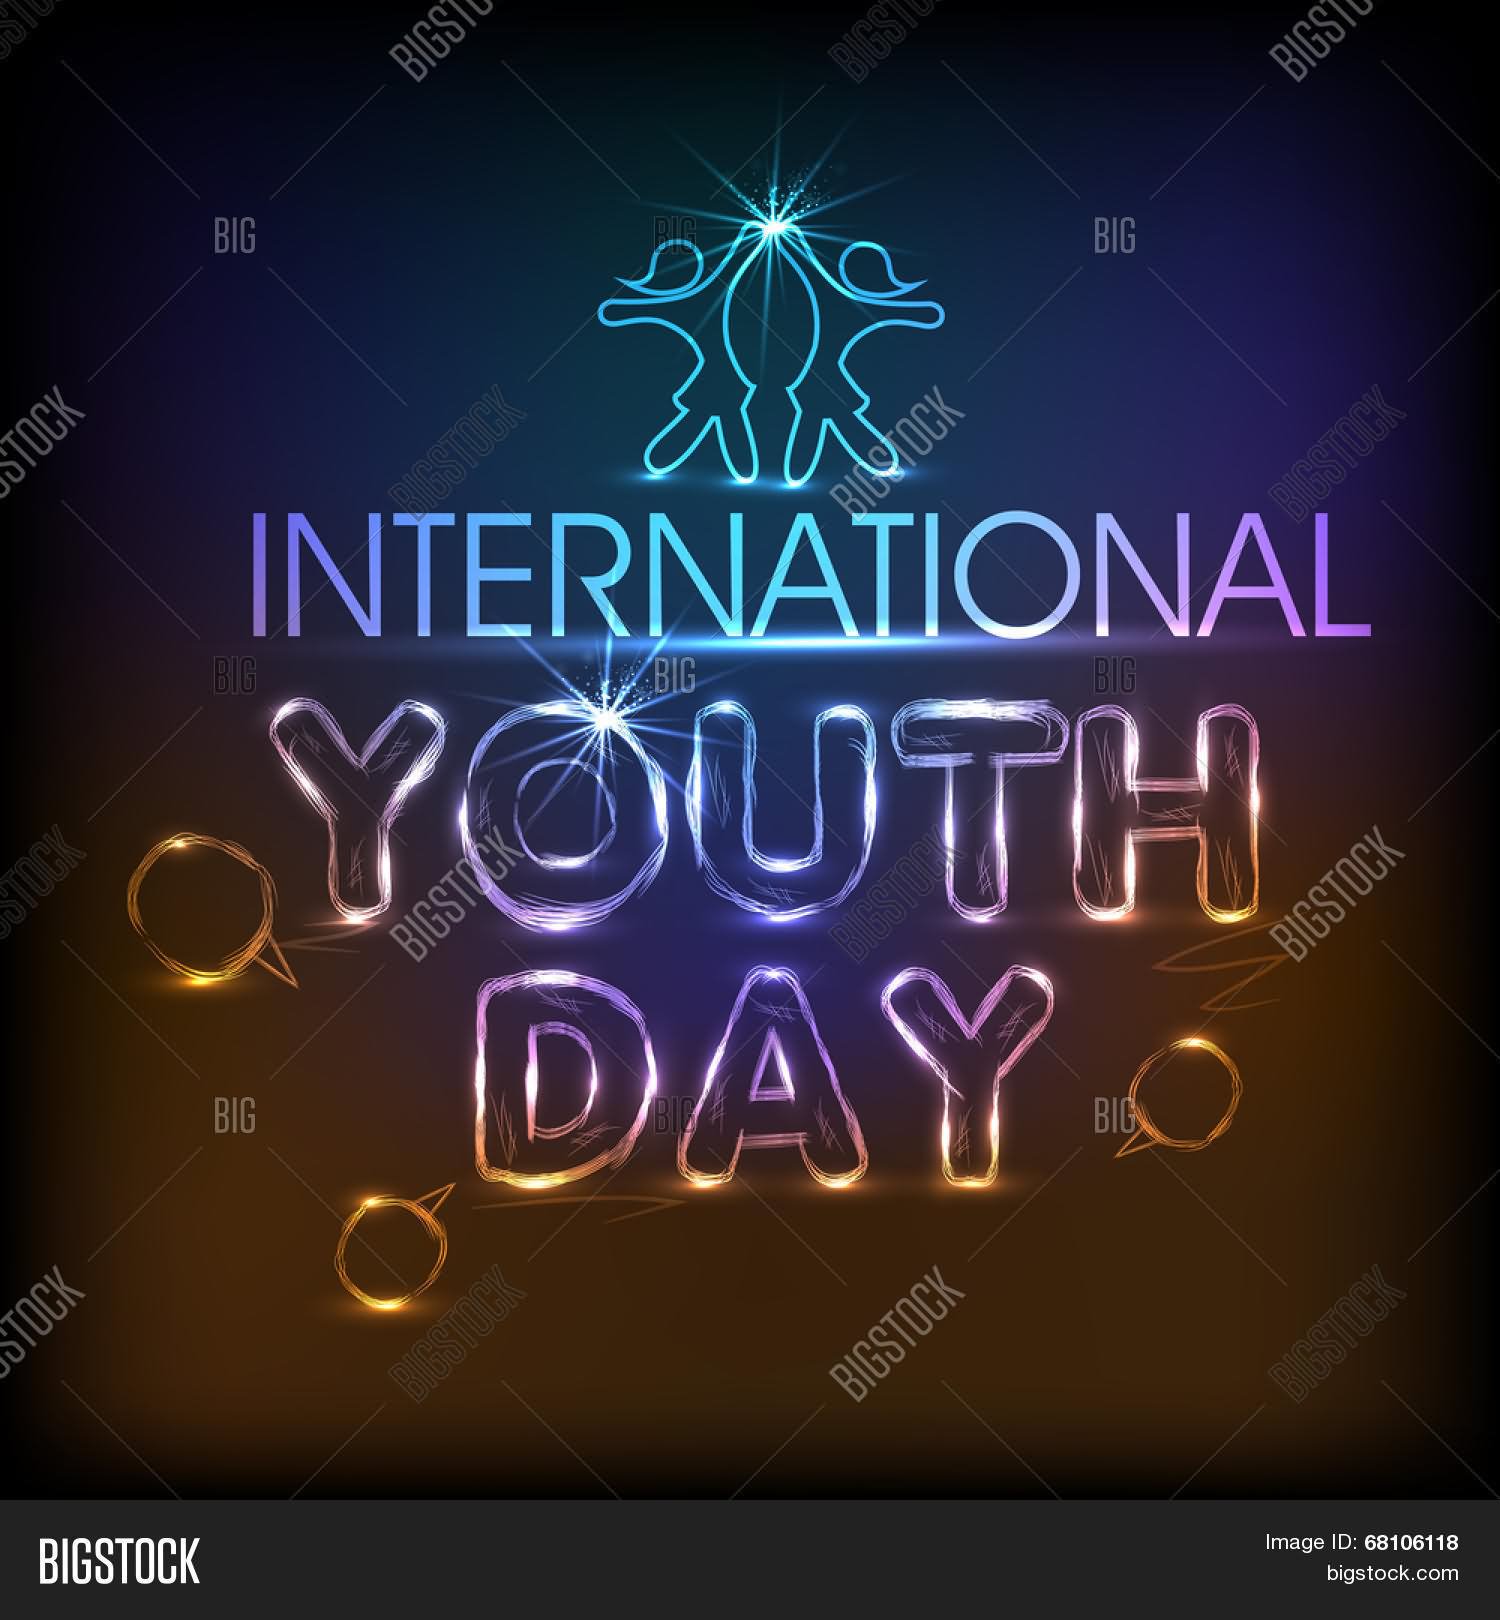 International Youth Day Shiny Text Picture